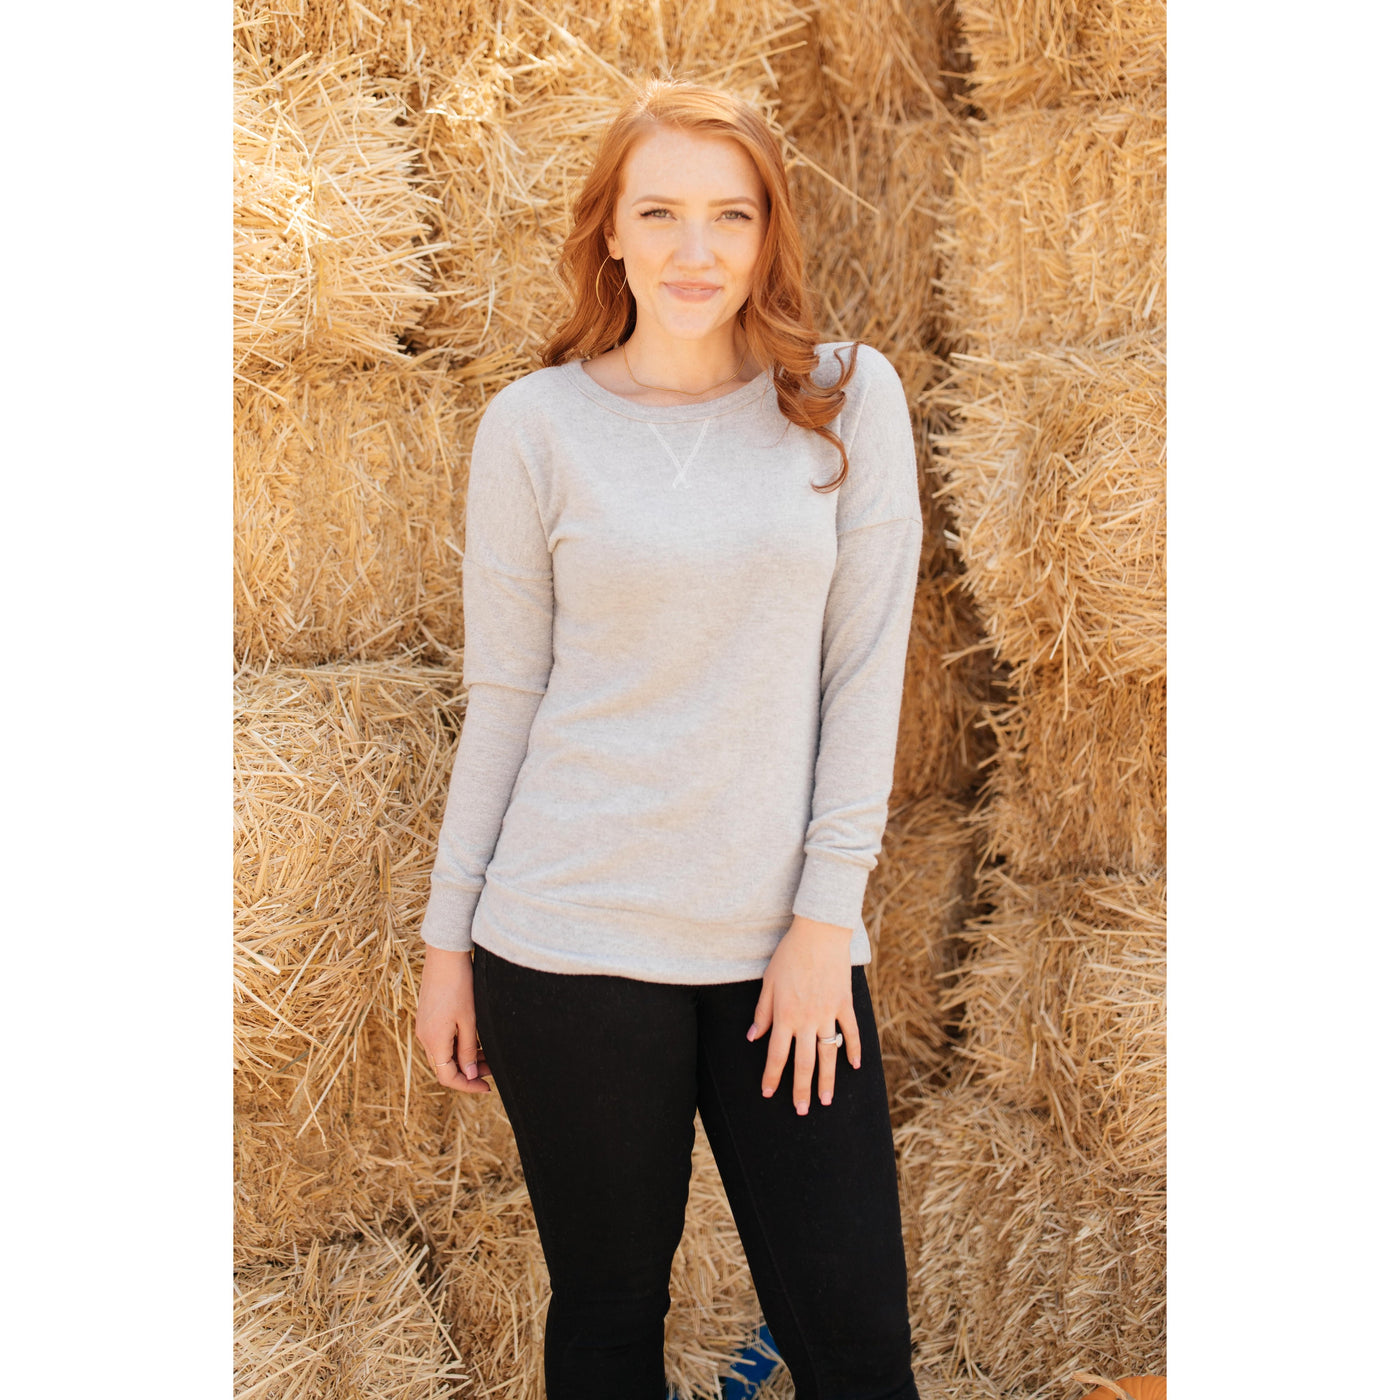 Sadie's Simple Sweater in Gray-W Top-Graceful & Chic Boutique, Family Clothing Store in Waxahachie, Texas